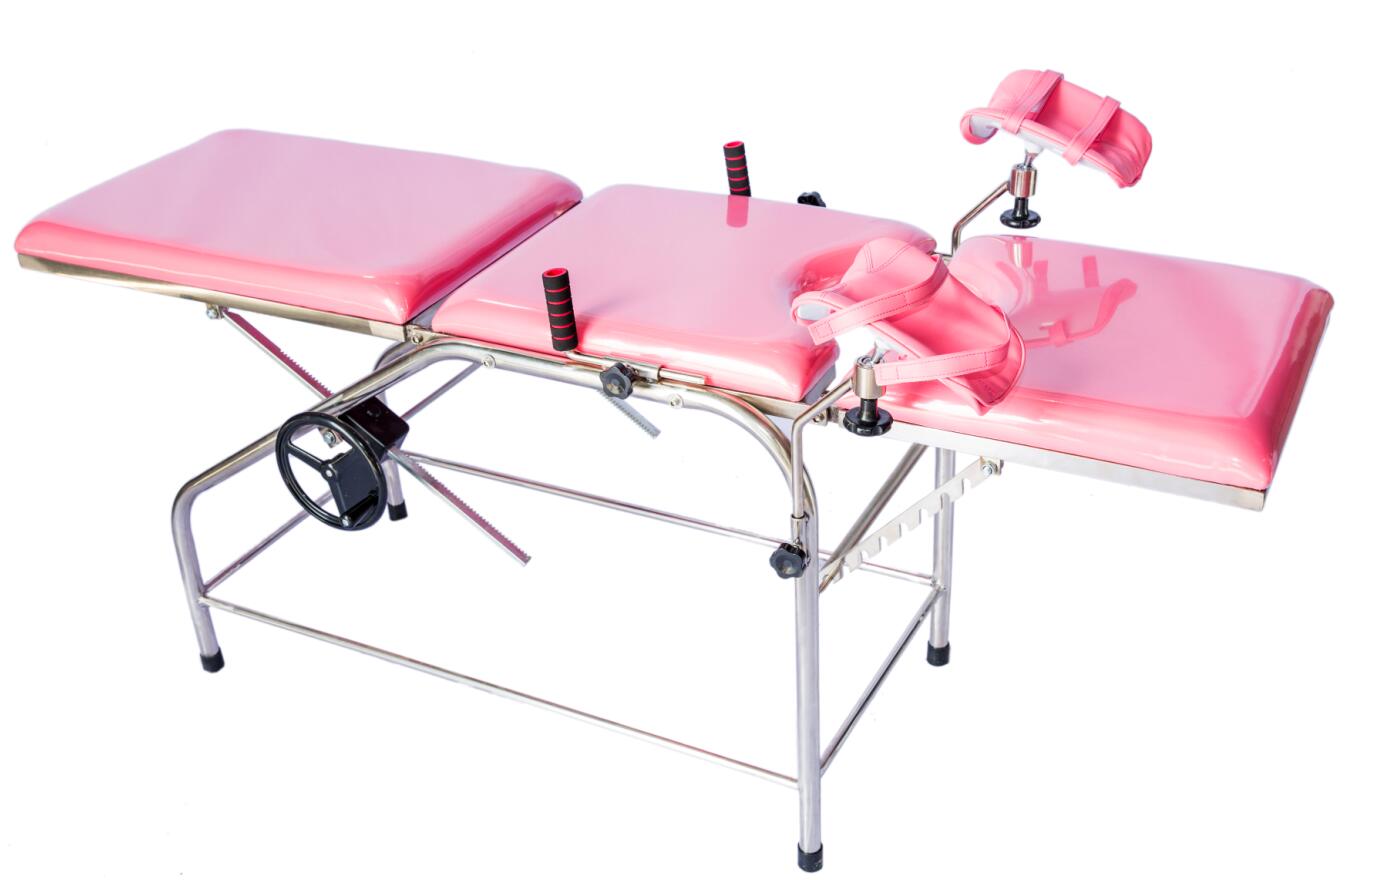 SXS 4A.4B series gynecological examination bed